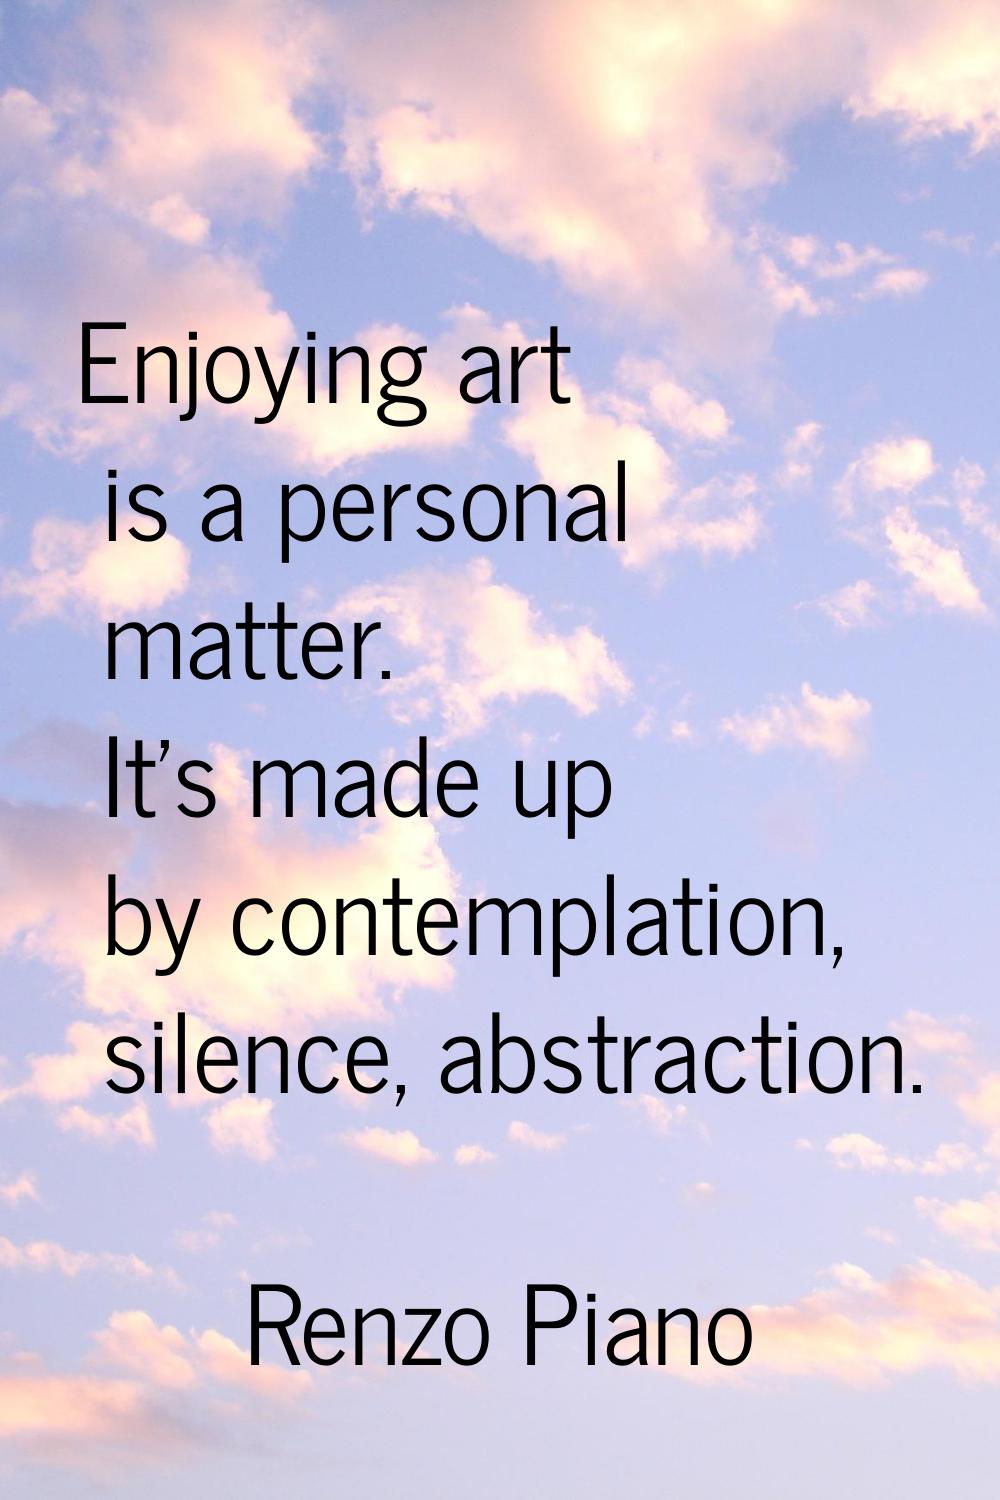 Enjoying art is a personal matter. It's made up by contemplation, silence, abstraction.